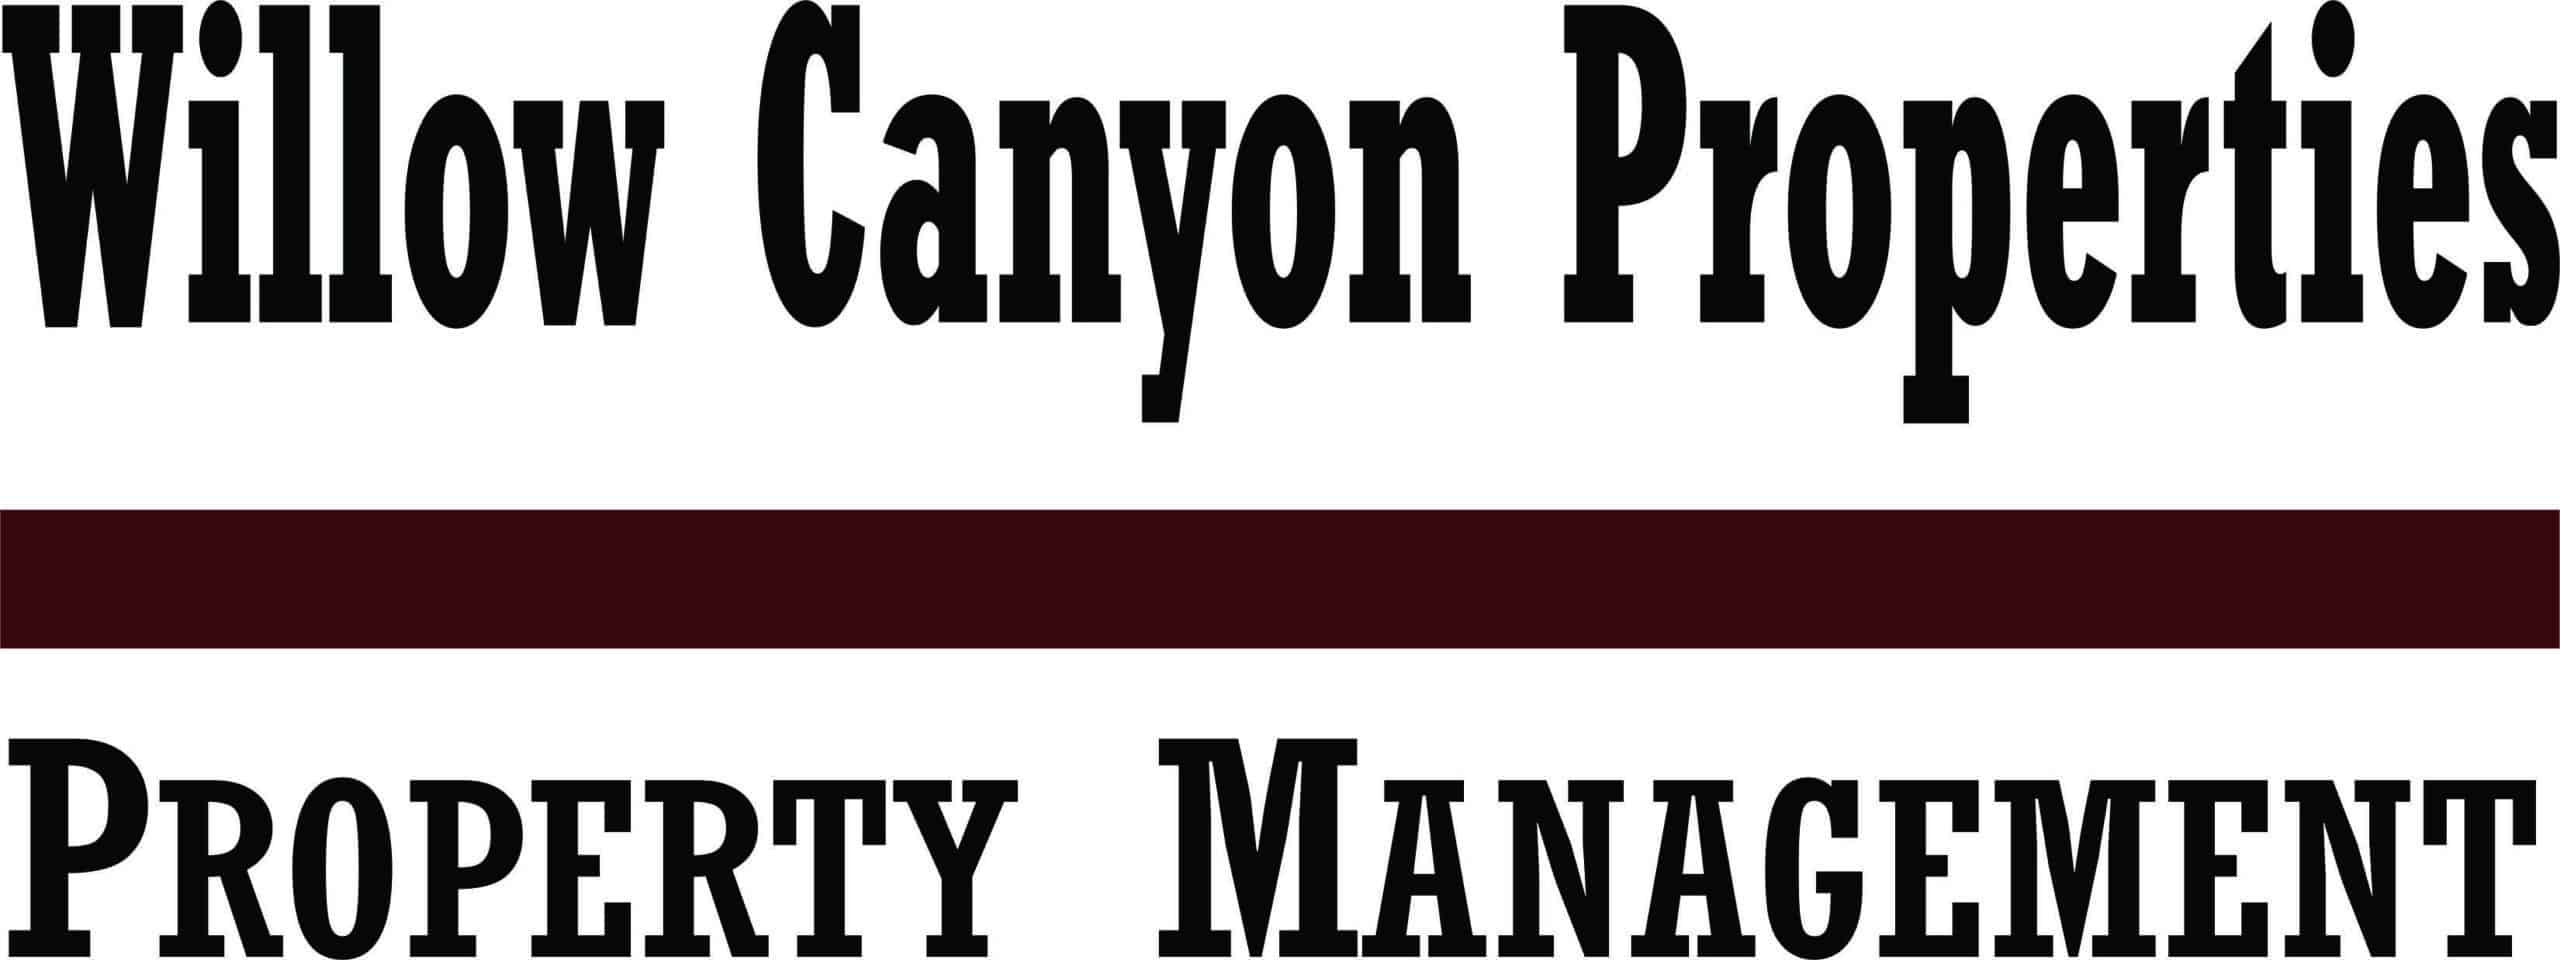 willow-canyon-properties-logo-scaled.jpg